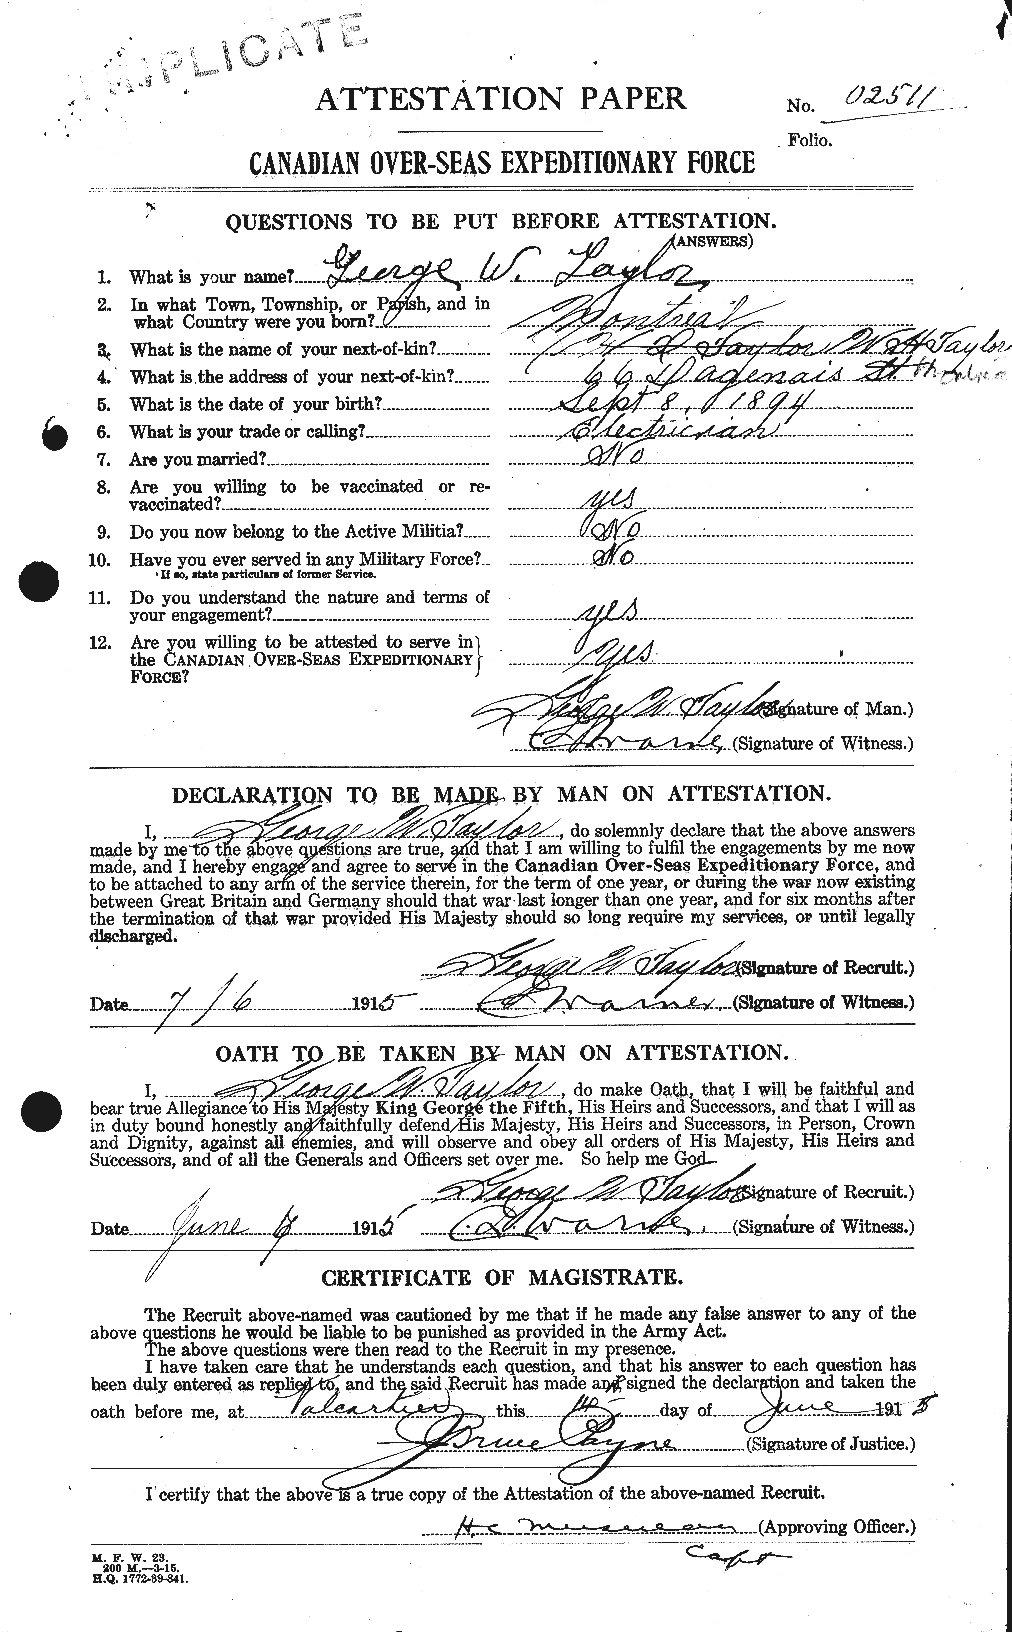 Personnel Records of the First World War - CEF 626359a